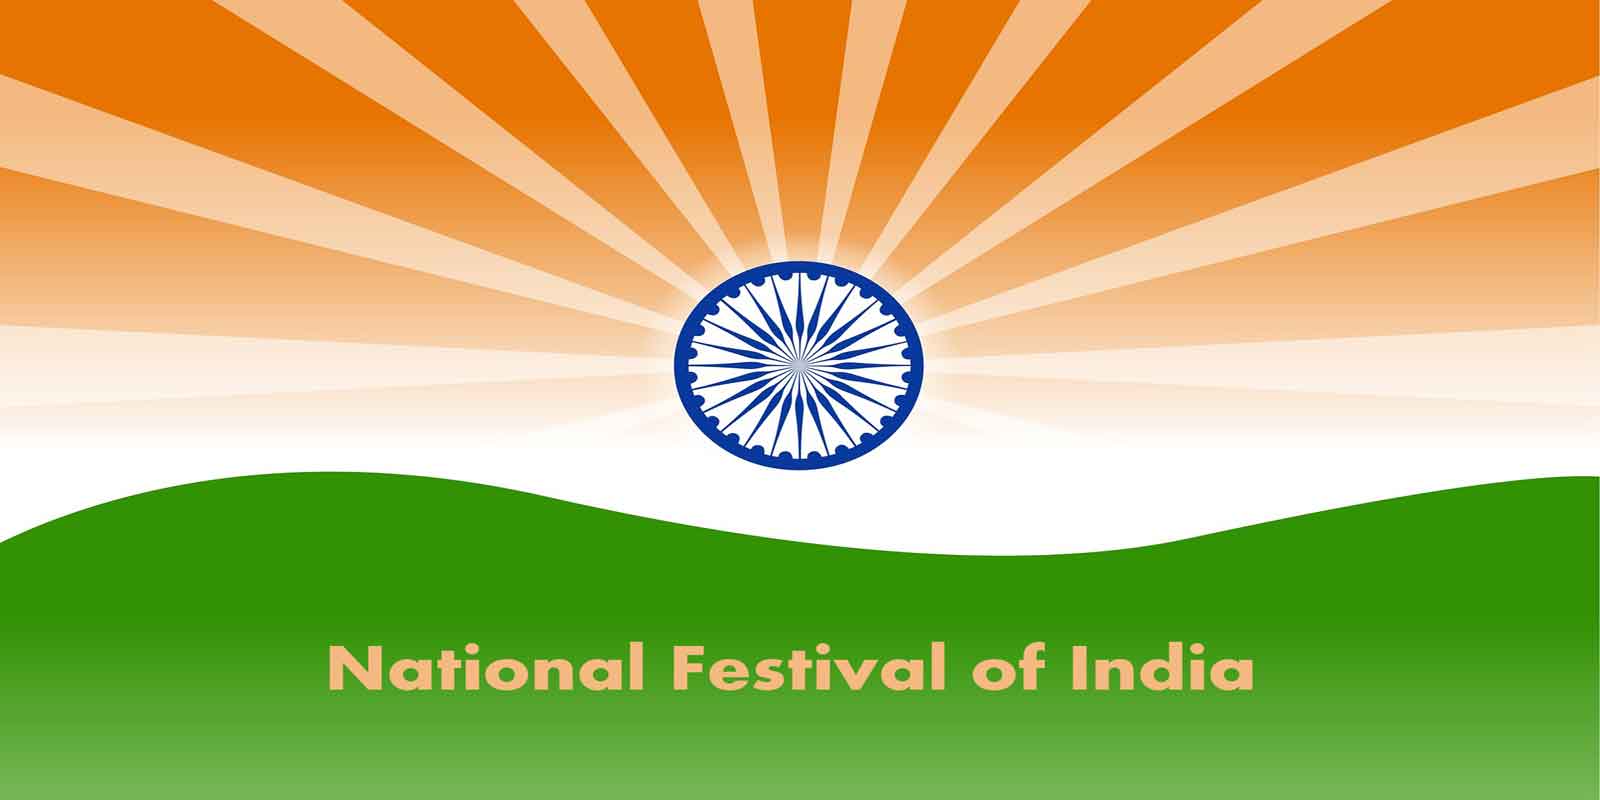 Know the history behind the National Festival of India